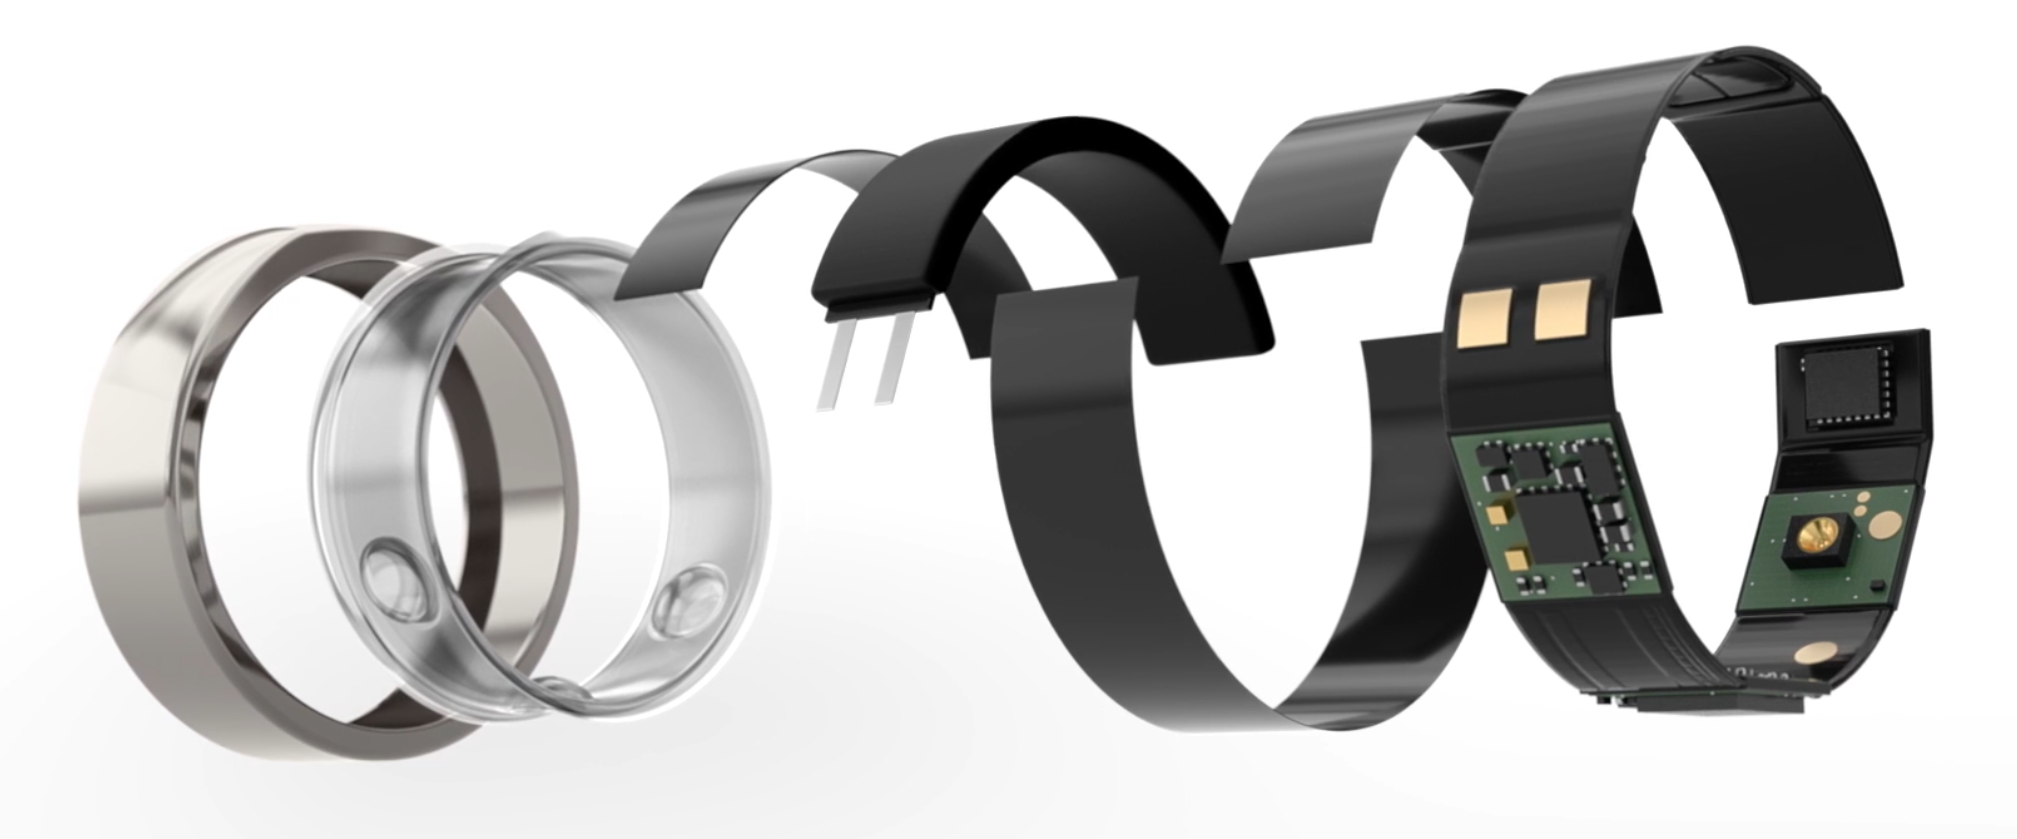 Oura ring - internal components